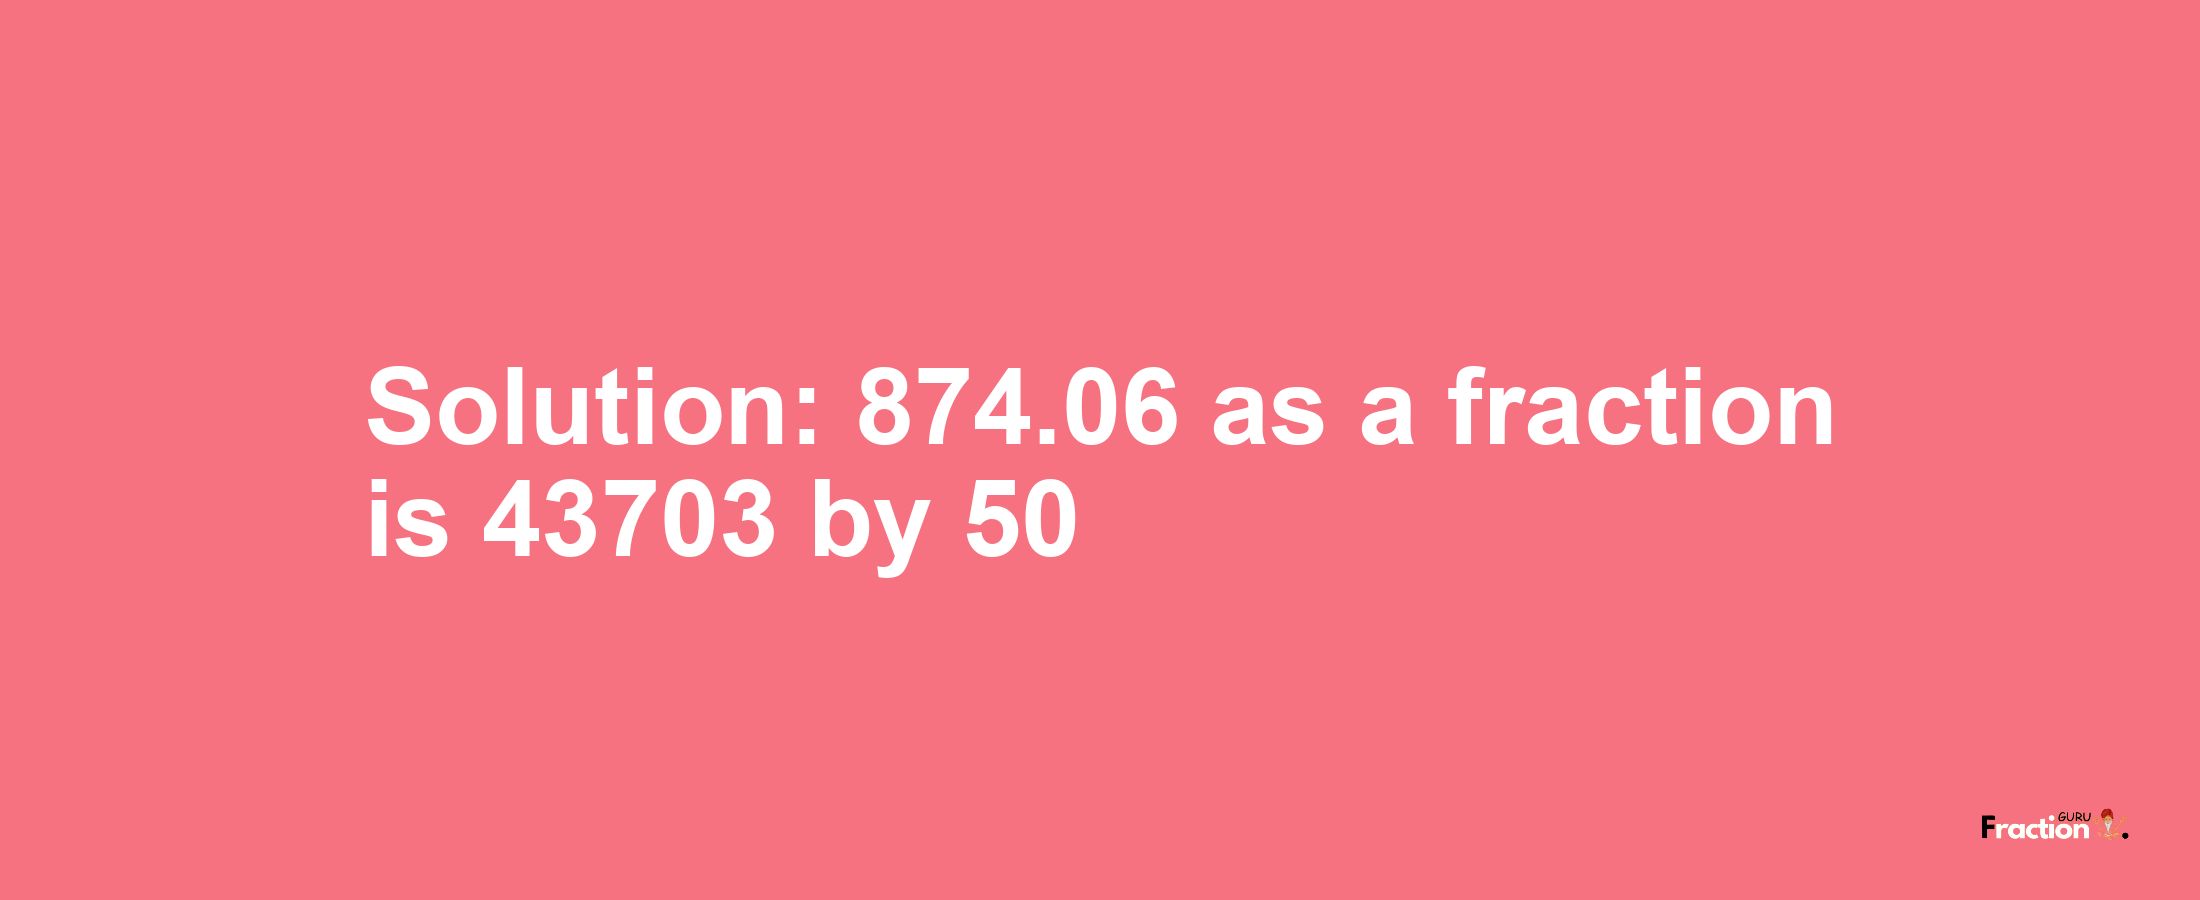 Solution:874.06 as a fraction is 43703/50